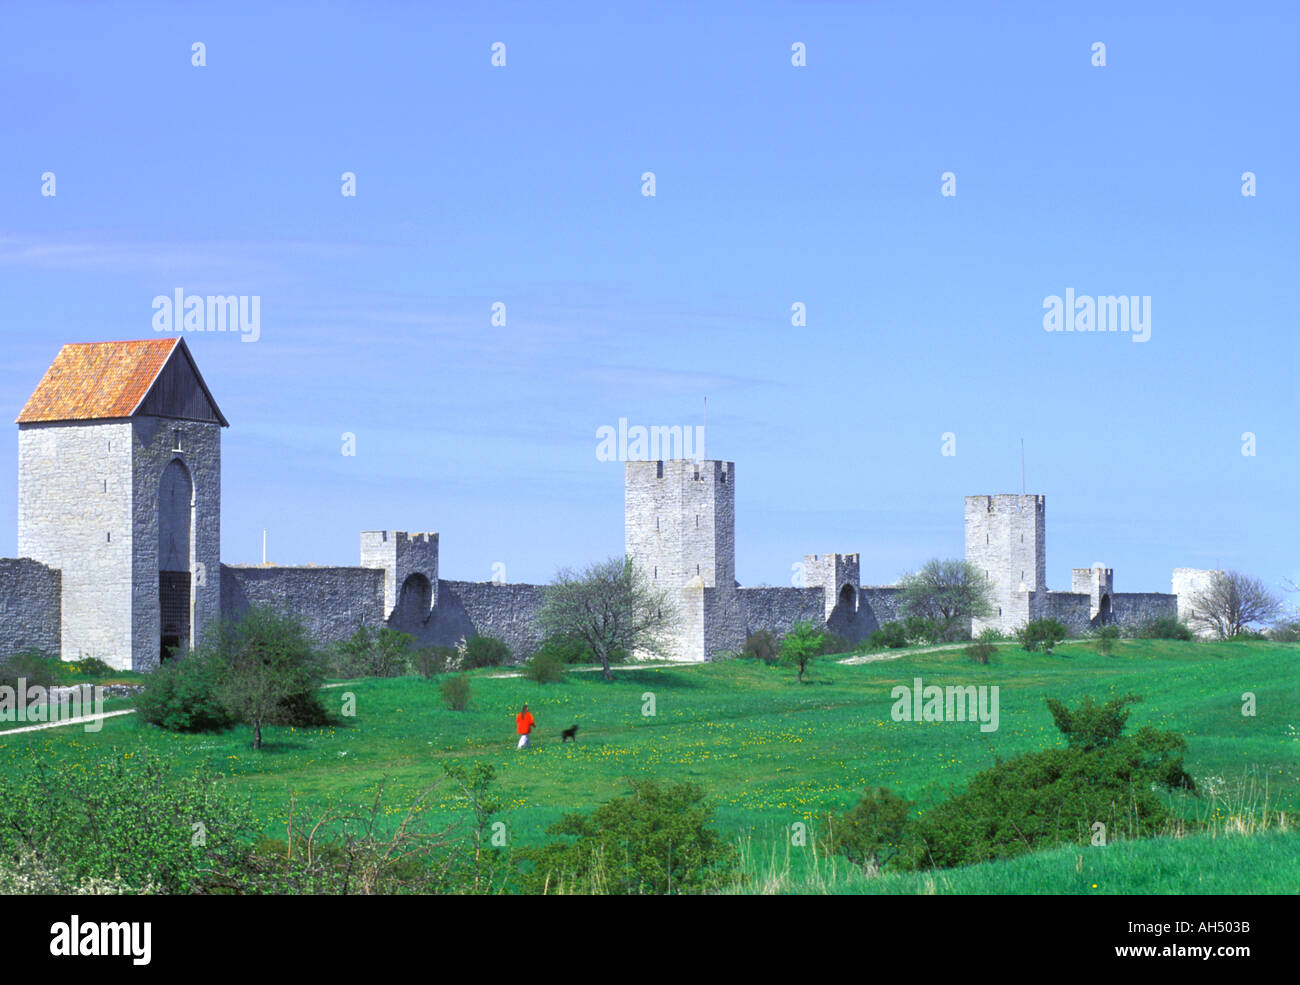 SWEDEN GOTLAND ISLAND MEDIEVAL HANSEATIC TOWN OF VISBY BEST PRESERVED FORTIFIED TOWN IN NORTHERN EUROPE  Stock Photo